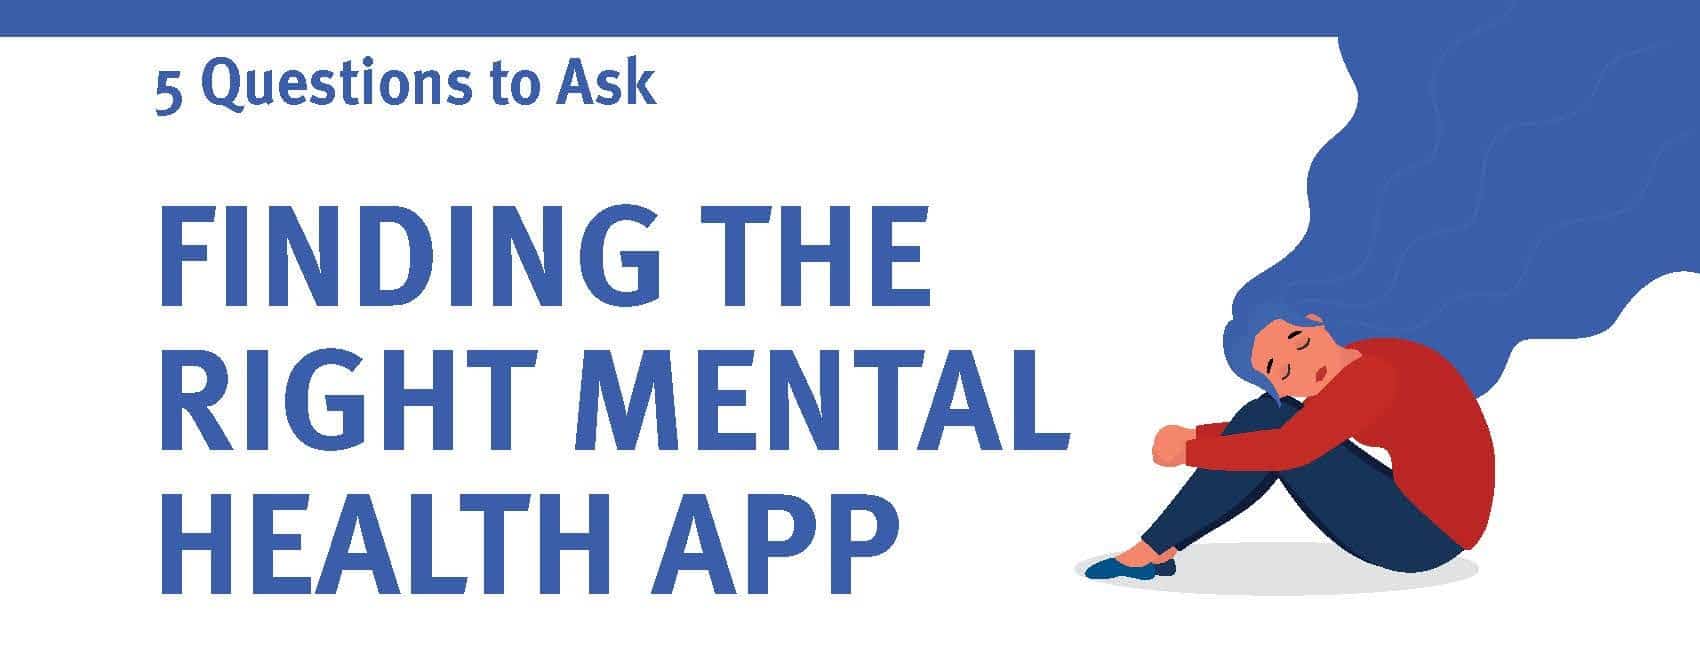 Finding The Right Mental Health App